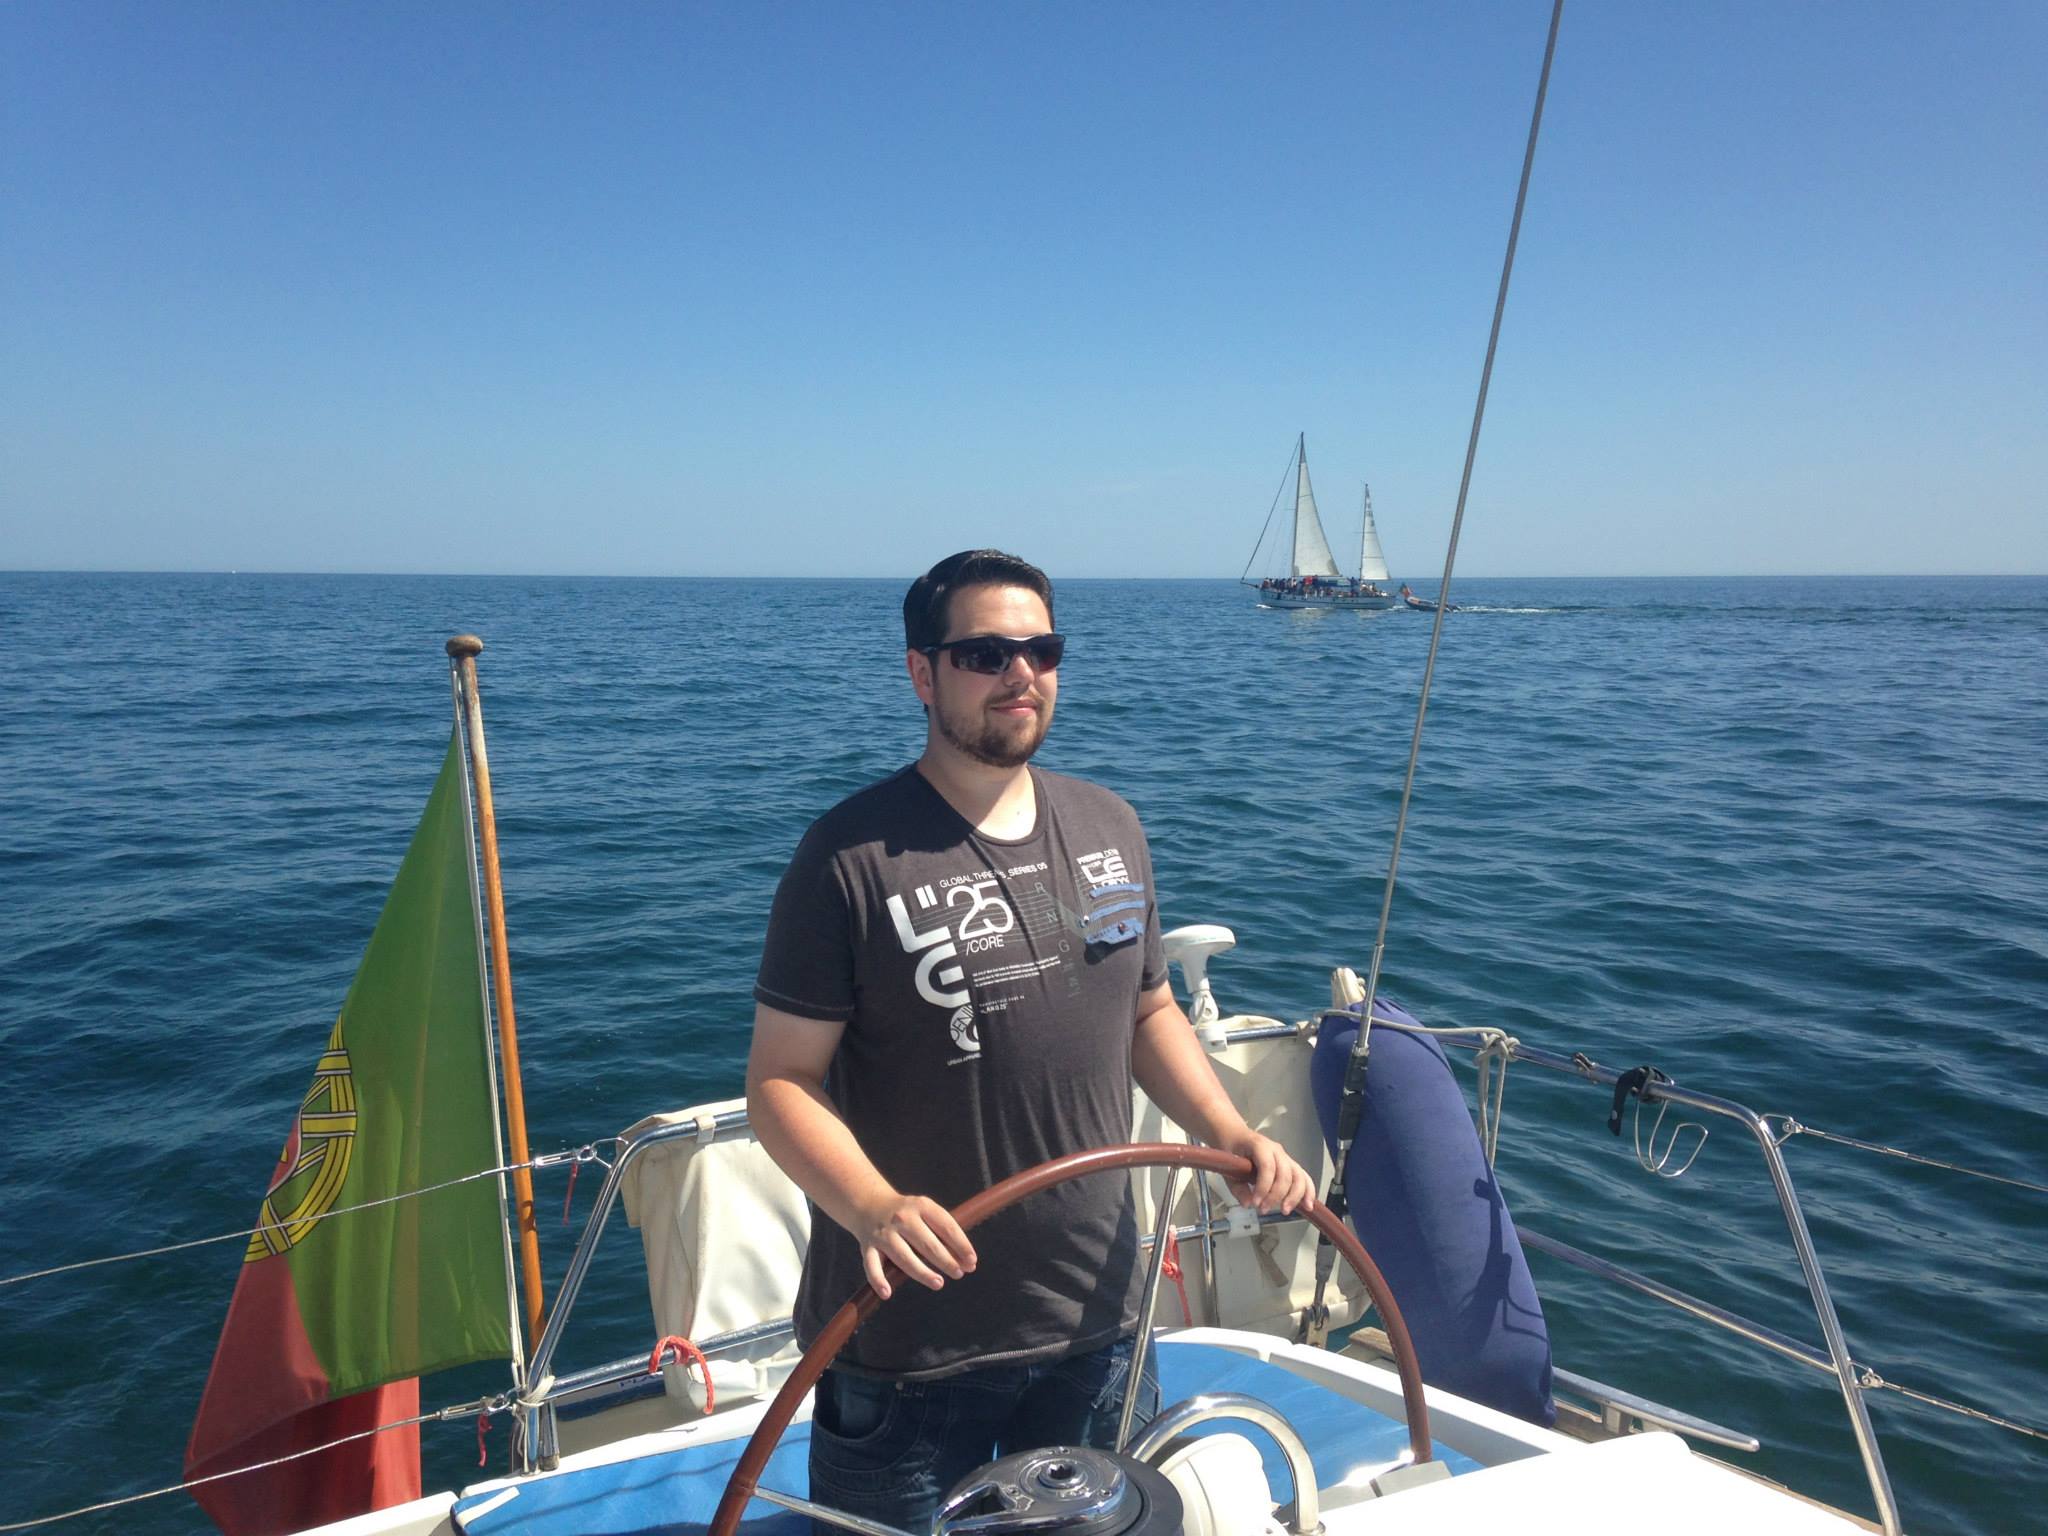 A photo of Ciaran Gallagher on a boat.